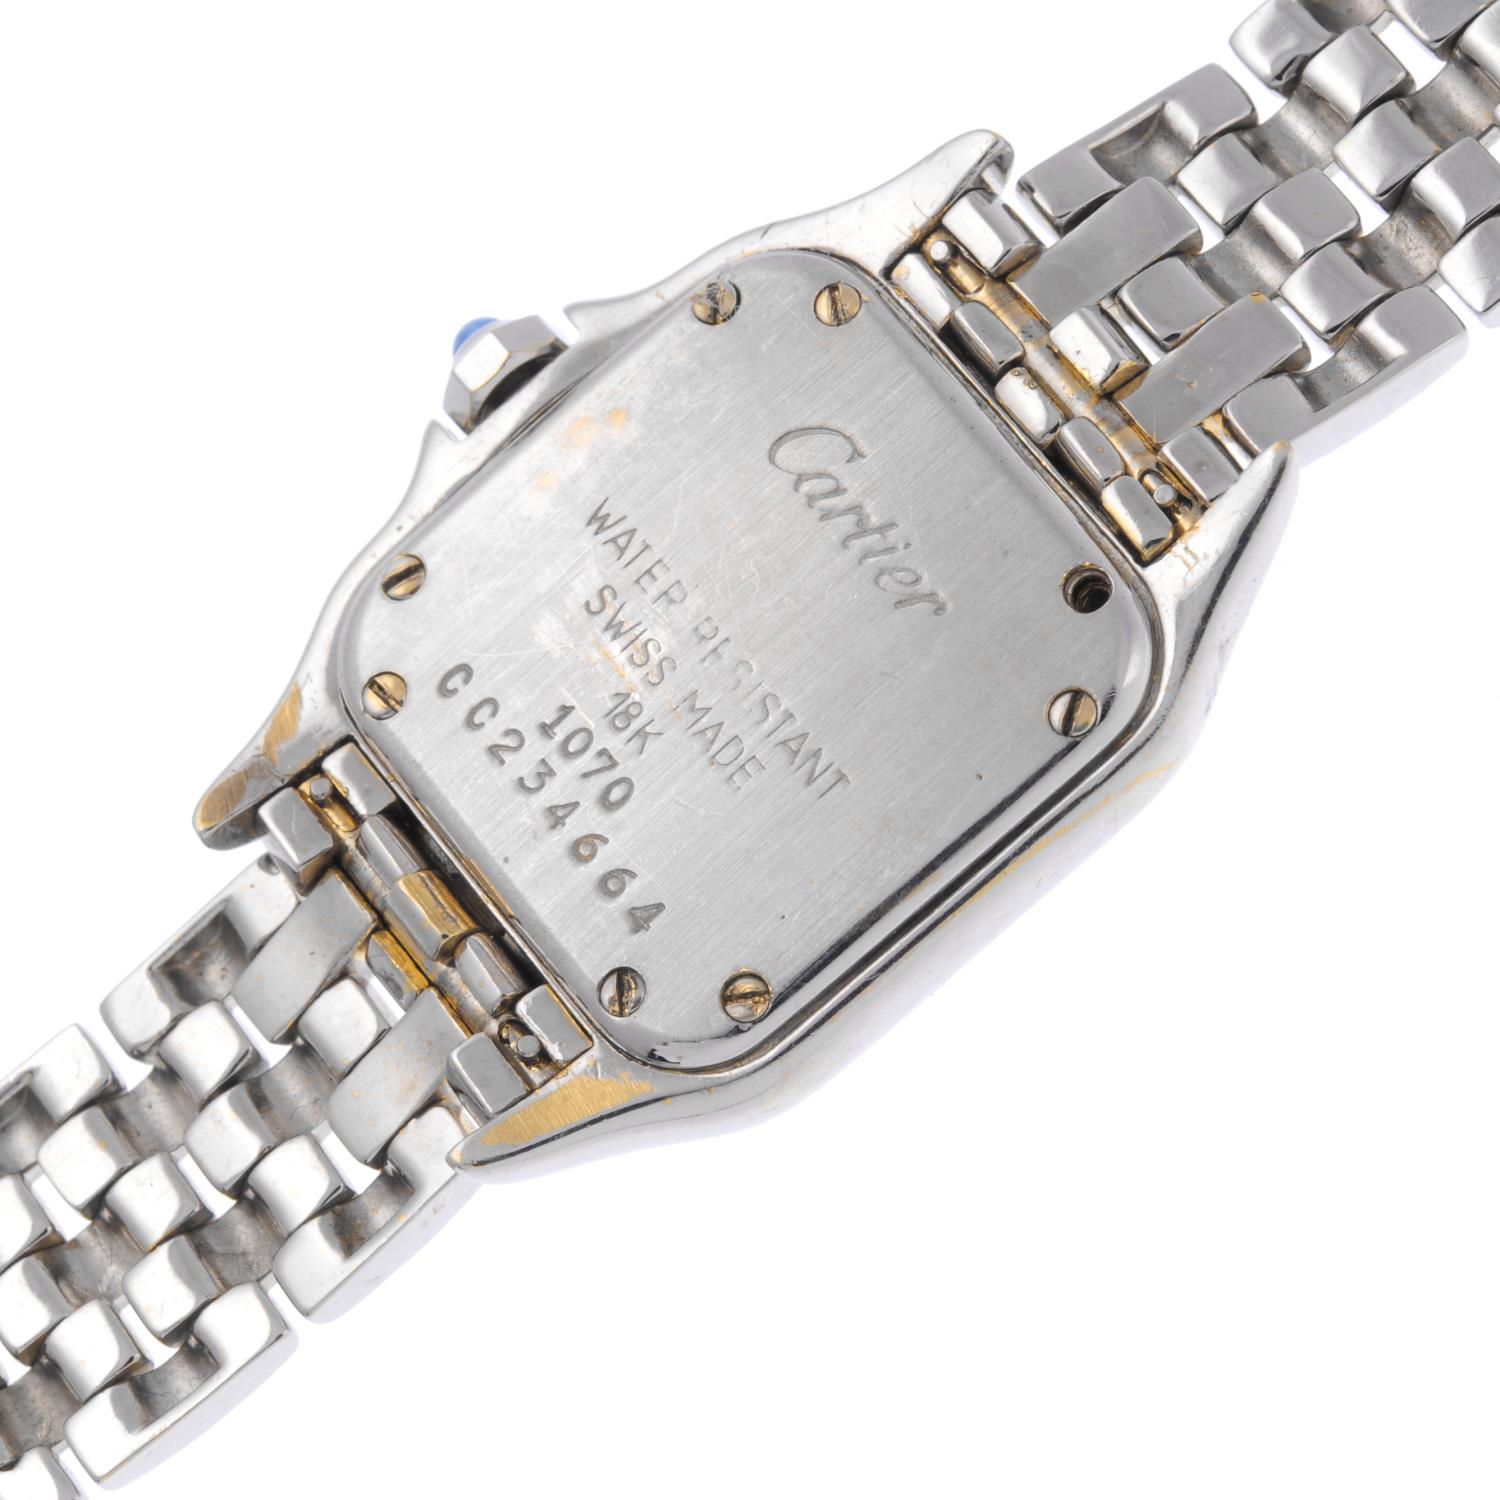 CARTIER - a lady's Panthere bracelet watch. - Image 2 of 3